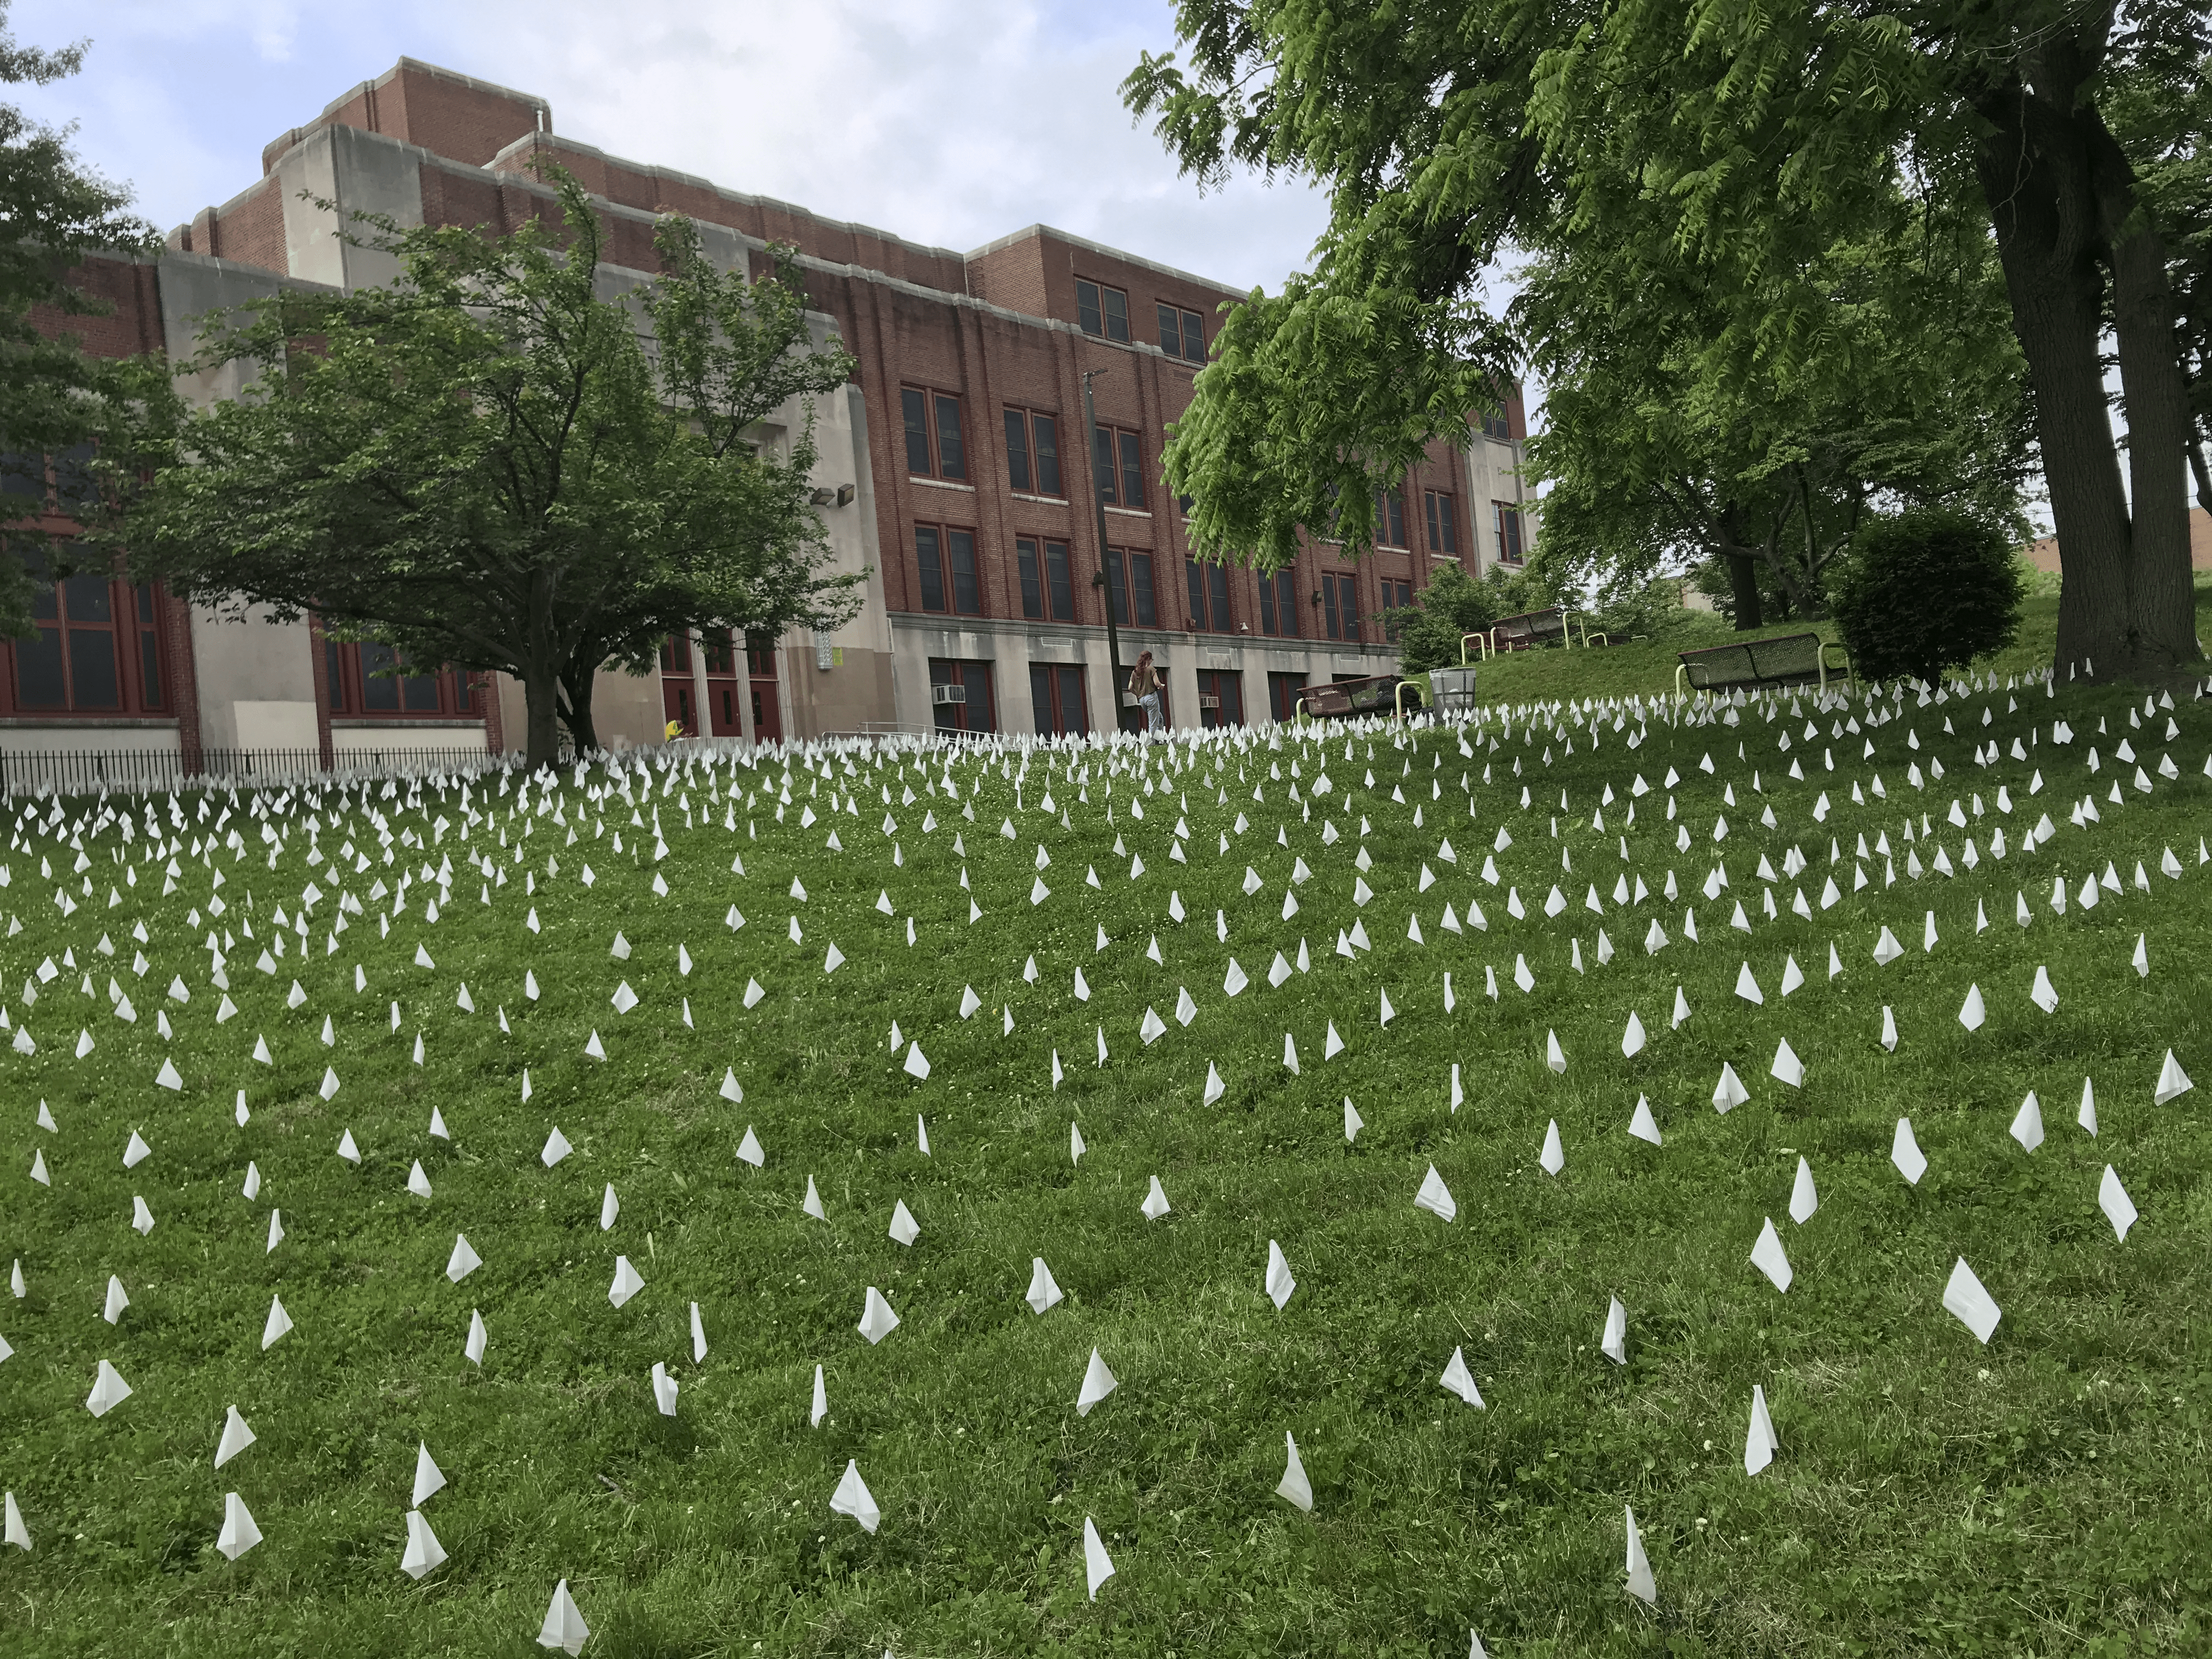 The 3,408 white flags in front of Central High School marked the number of civilian lives lost in the Syrian Civil War this year. Image by Ken Hung. Maryland, 2018. 